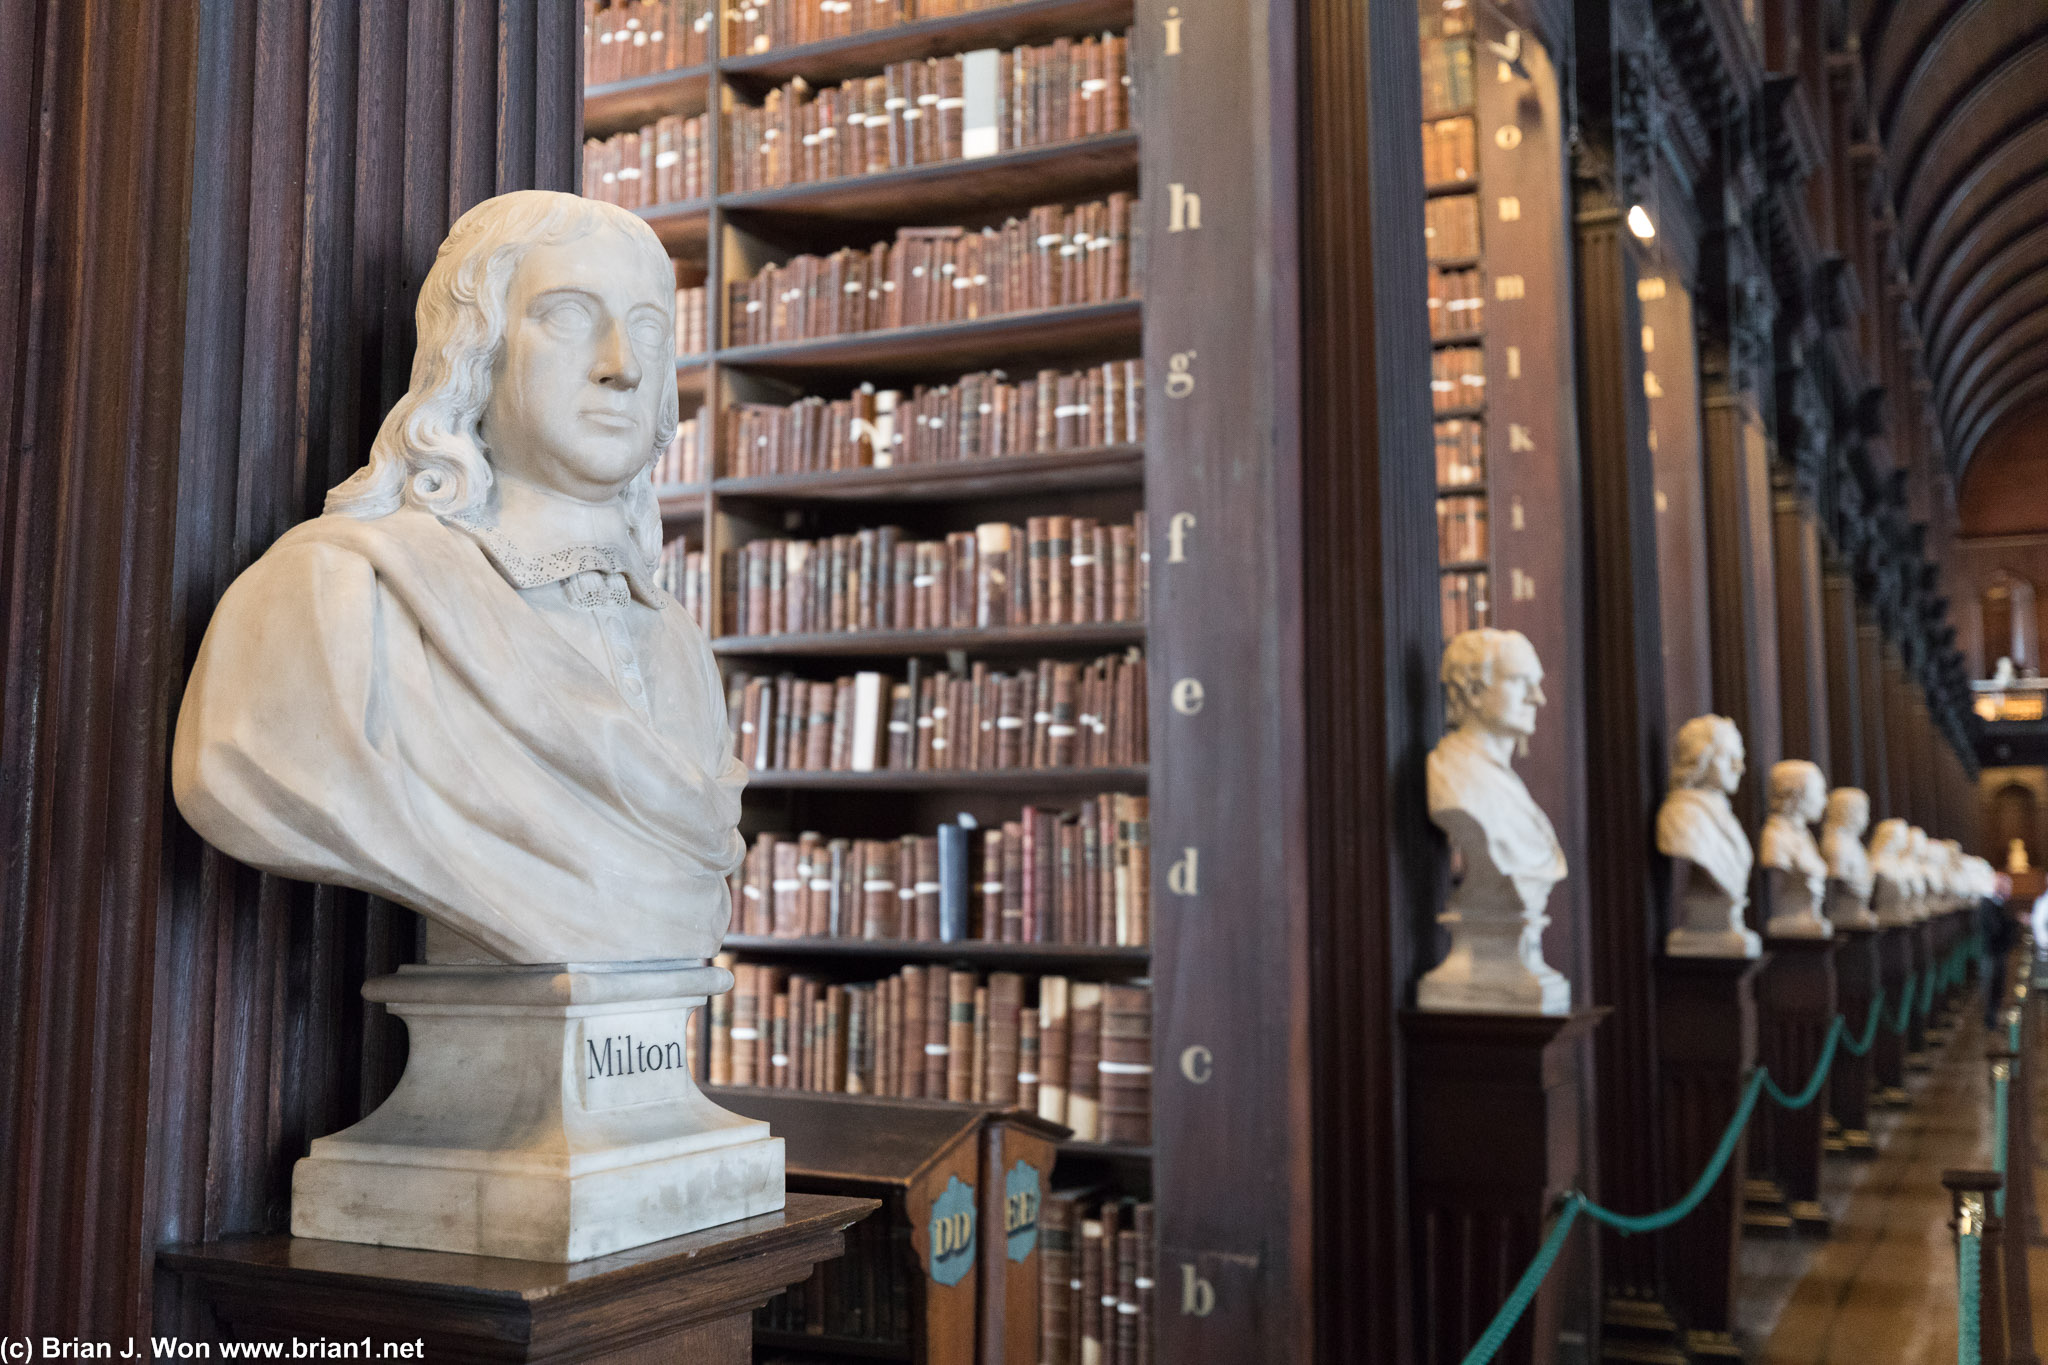 Lined with busts of scholars.